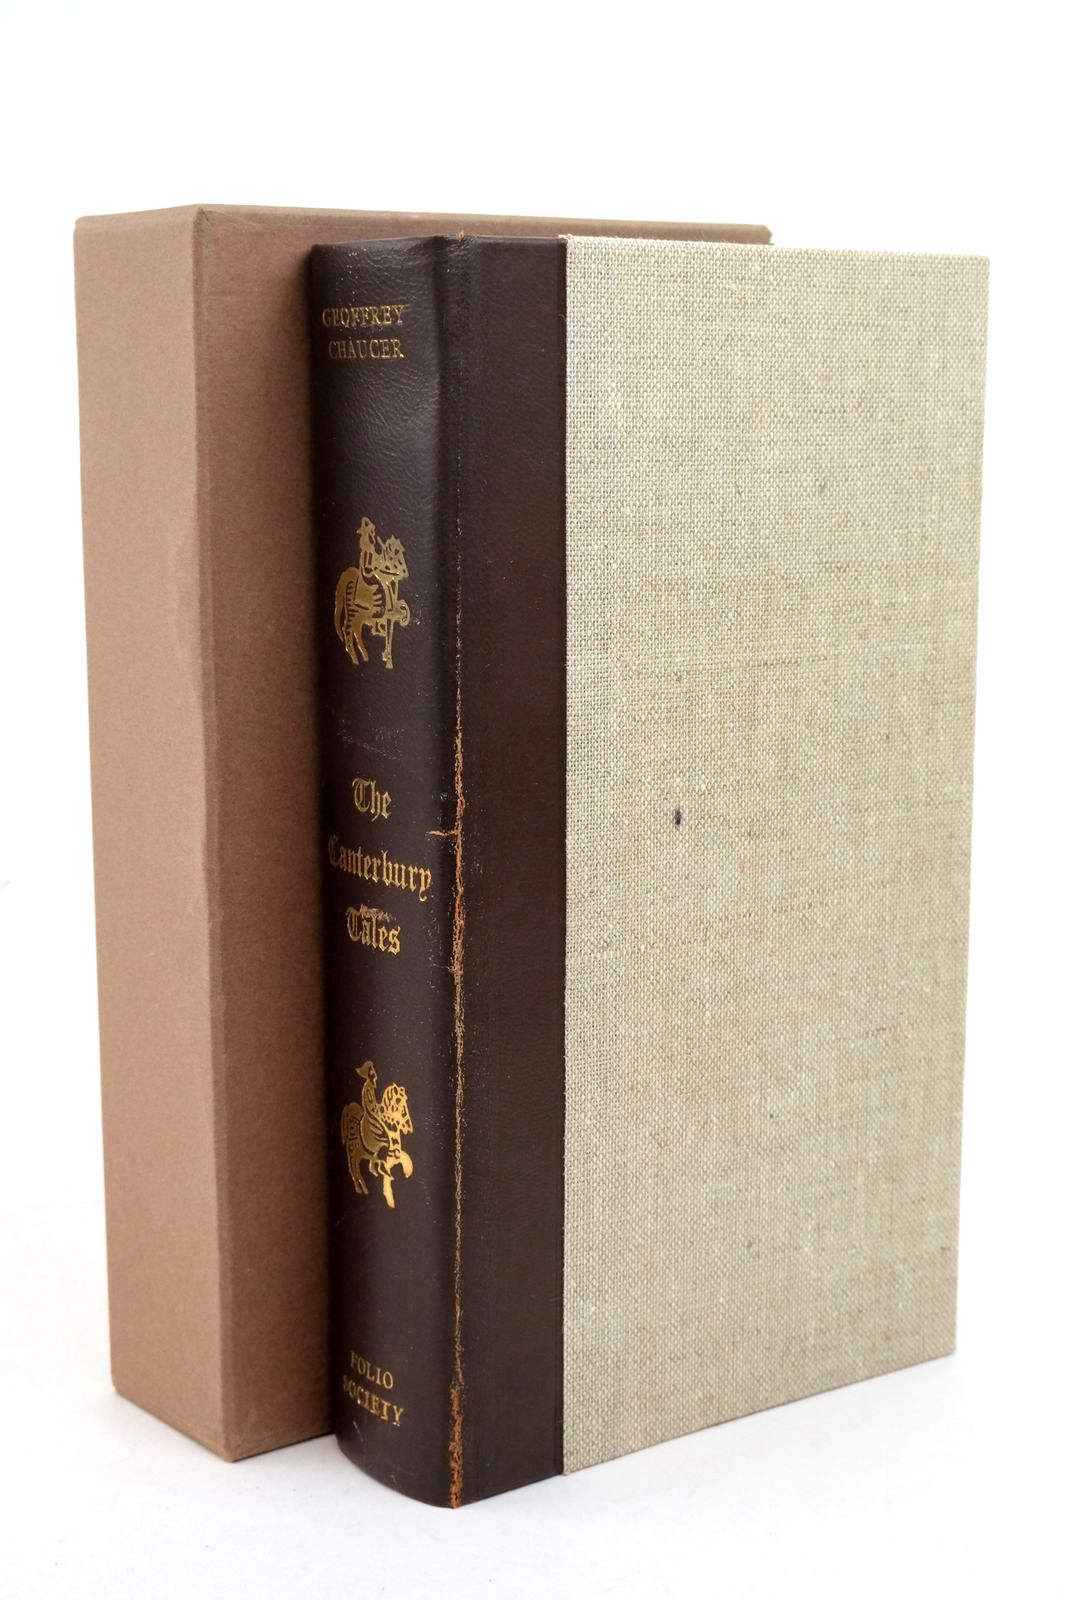 Photo of THE CANTERBURY TALES written by Chaucer, Geoffrey Coghill, Nevill illustrated by Whyte, Edna published by Folio Society (STOCK CODE: 1322871)  for sale by Stella & Rose's Books